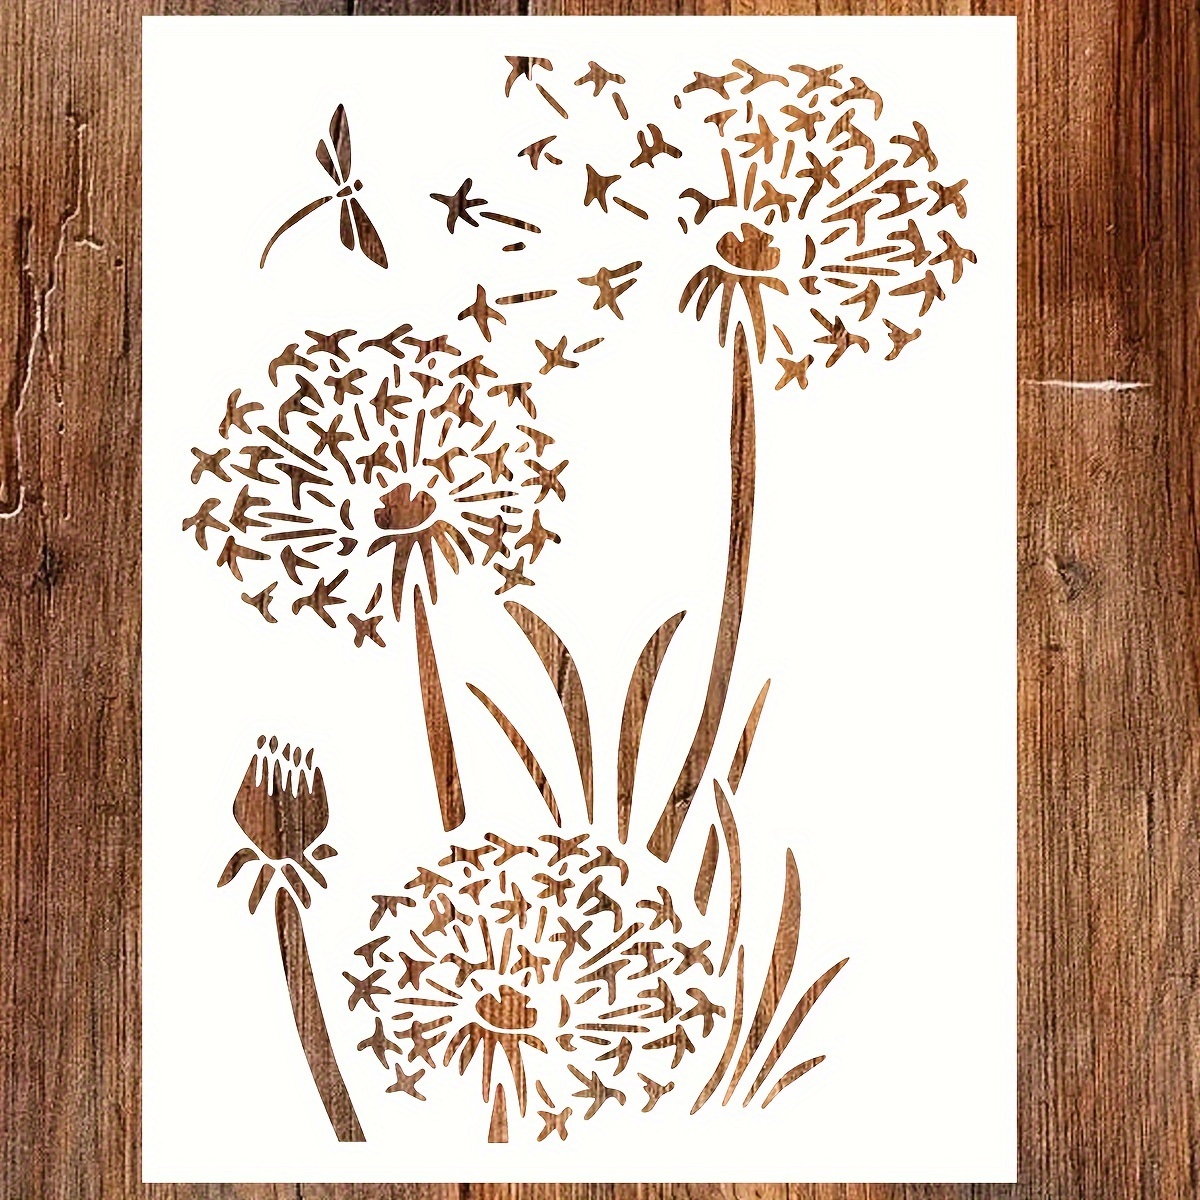 

1pc Large 12x16 Inch Dandelion Stencil For Painting On Wood, Canvas - Reusable Drawing Stencils For Crafts, Wall, Art, Furniture - Wildflower Stencil - Stencils Home Décor Eid Al-adha Mubarak